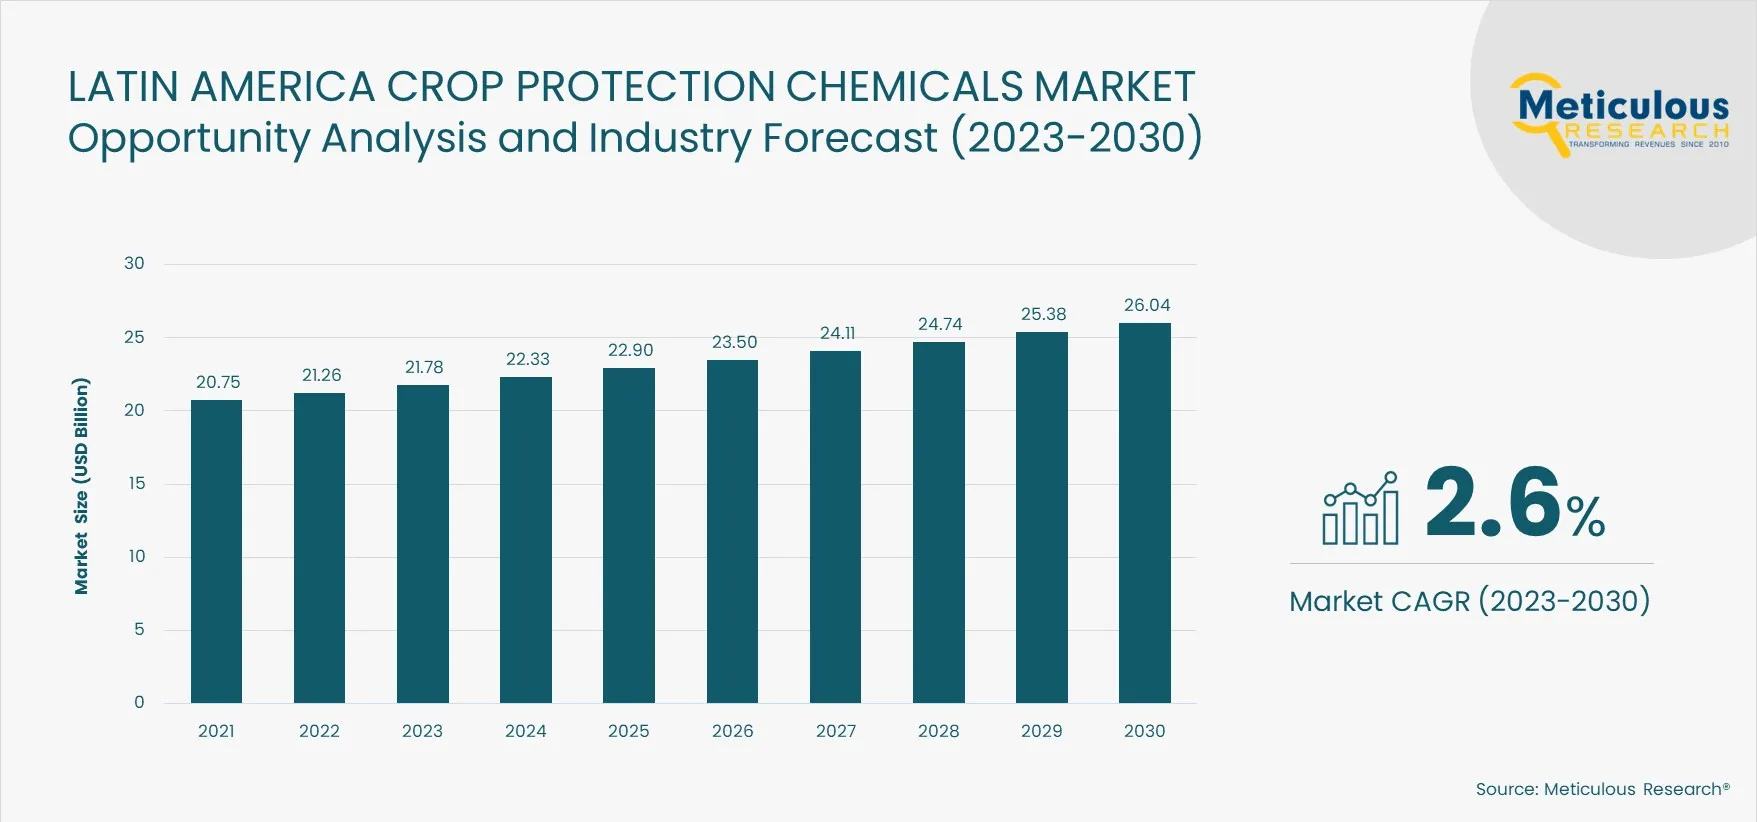 Latin America Crop Protection Chemicals Market Bar Chart